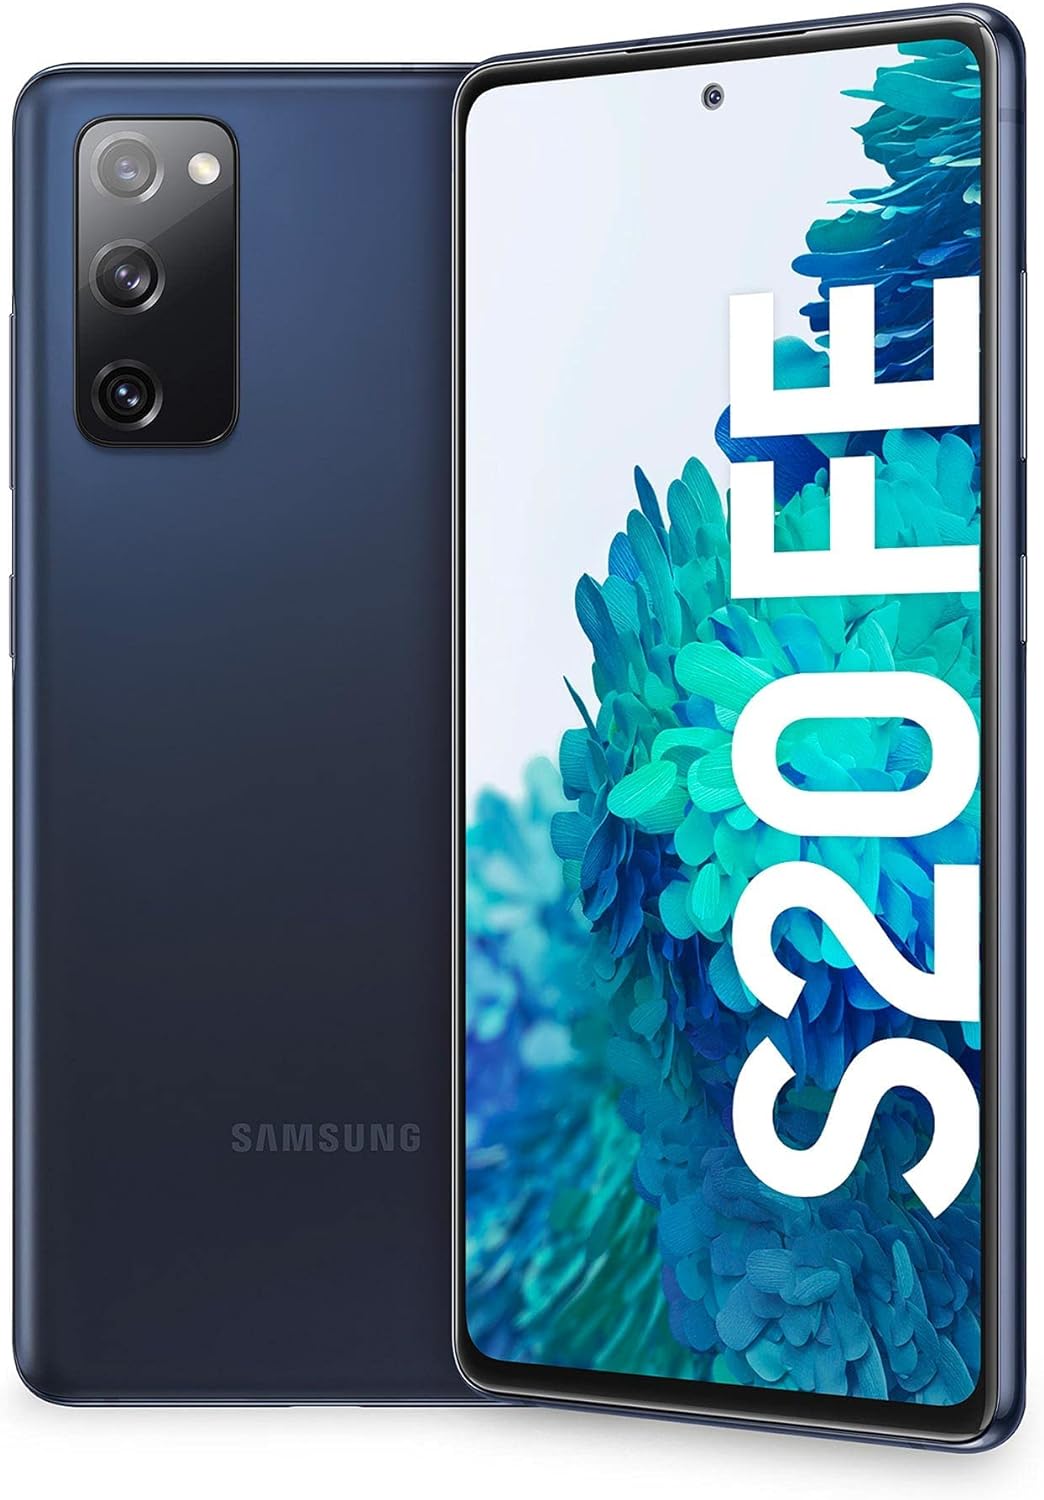 Samsung Galaxy S20 FE 5G 128GB Cloud Navy Single sim + (esim) Unlocked (Renewed)   Import  Single ASIN  Import  Multiple ASIN ×Product customization General Description Gallery Reviews Variations Additional details Product Tags - Amazing Gadgets Outlet